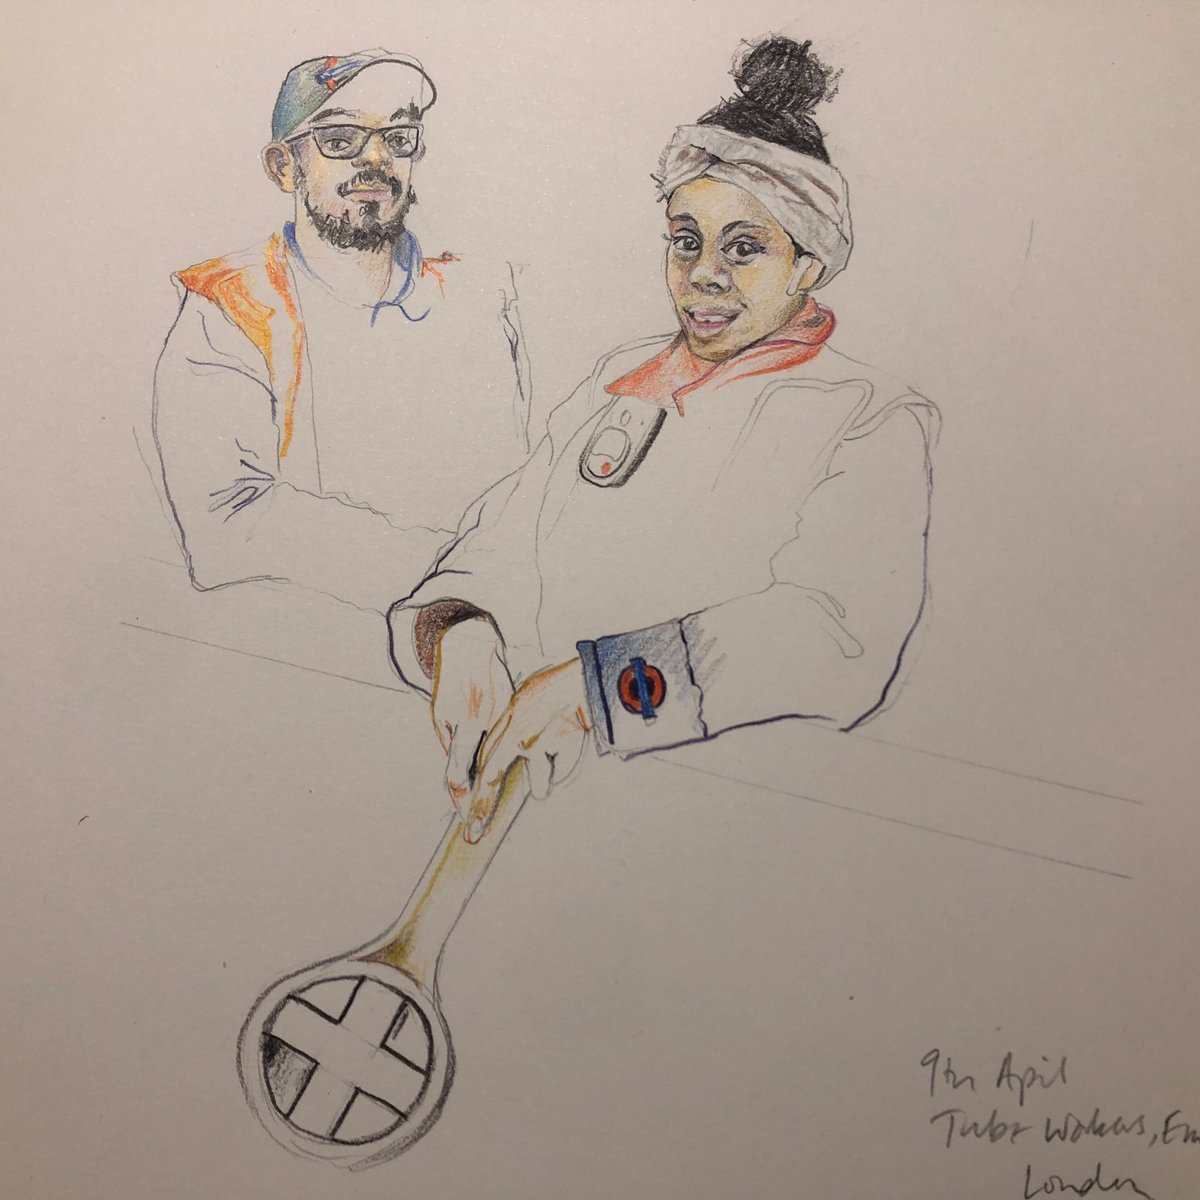 Tube workers, Embankment Station, the day before I started the residency at @earlscourtdevco last January, which I absolutely loved. I told them what I was about to do & they very graciously allowed me to photograph them. One-hour drawing, listening to @gidcoe & @marcrileydj